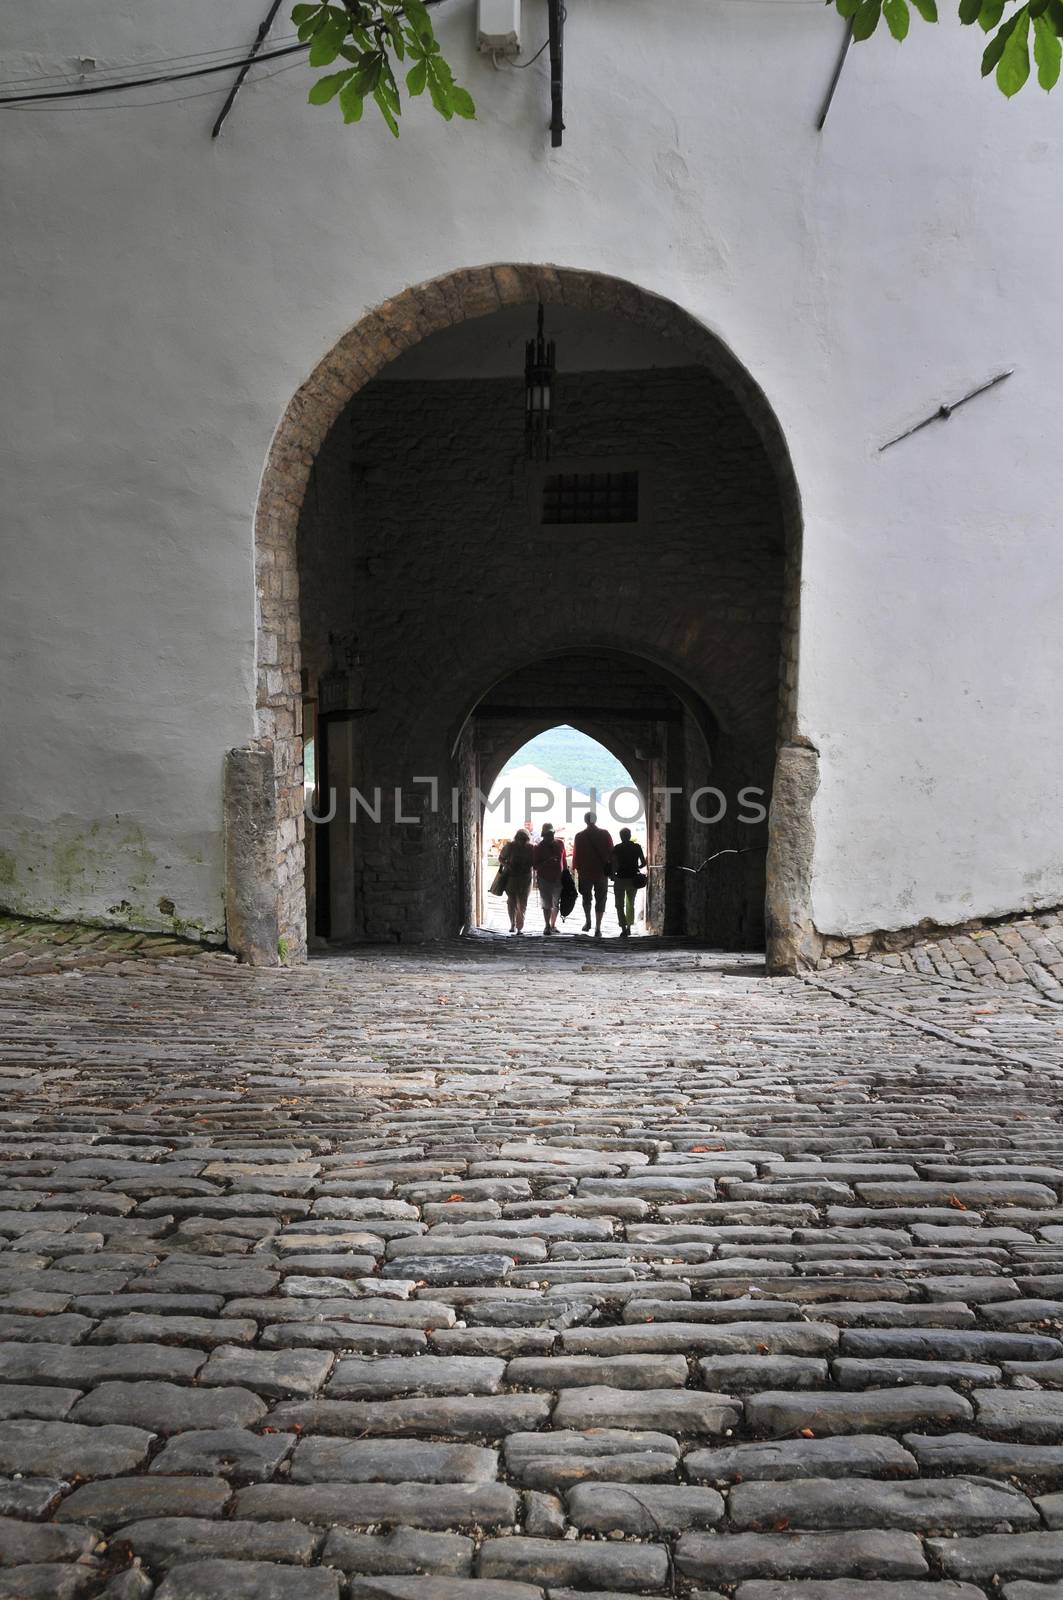 View of old city gate and tourists passing through the gate in historic istrian town of Motovun, Croatia.